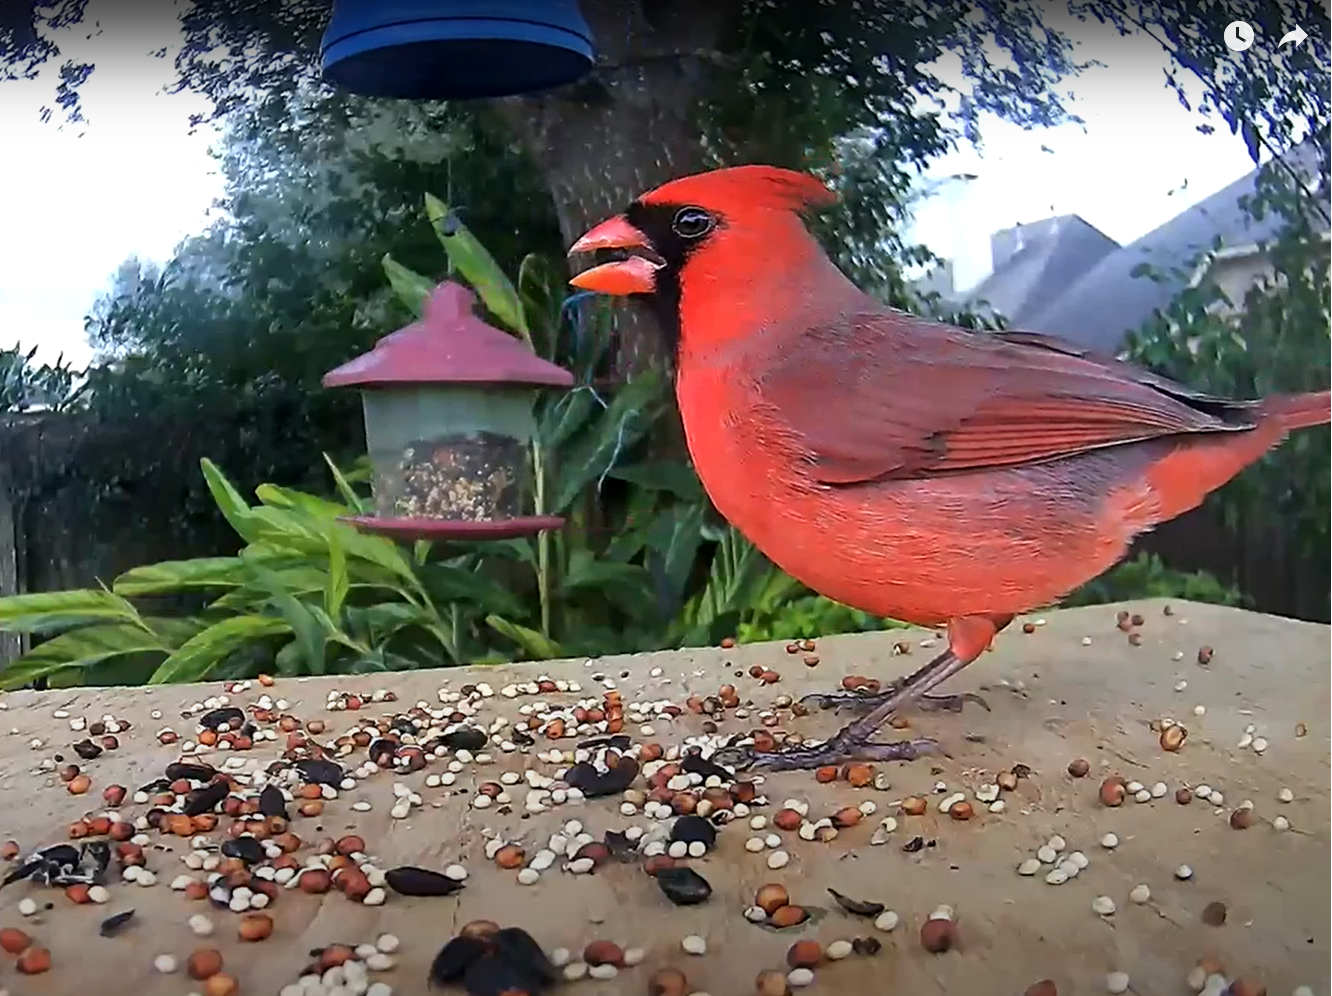 How to organize a “Zoom call” with birds - a new, DIY approach to bird ...